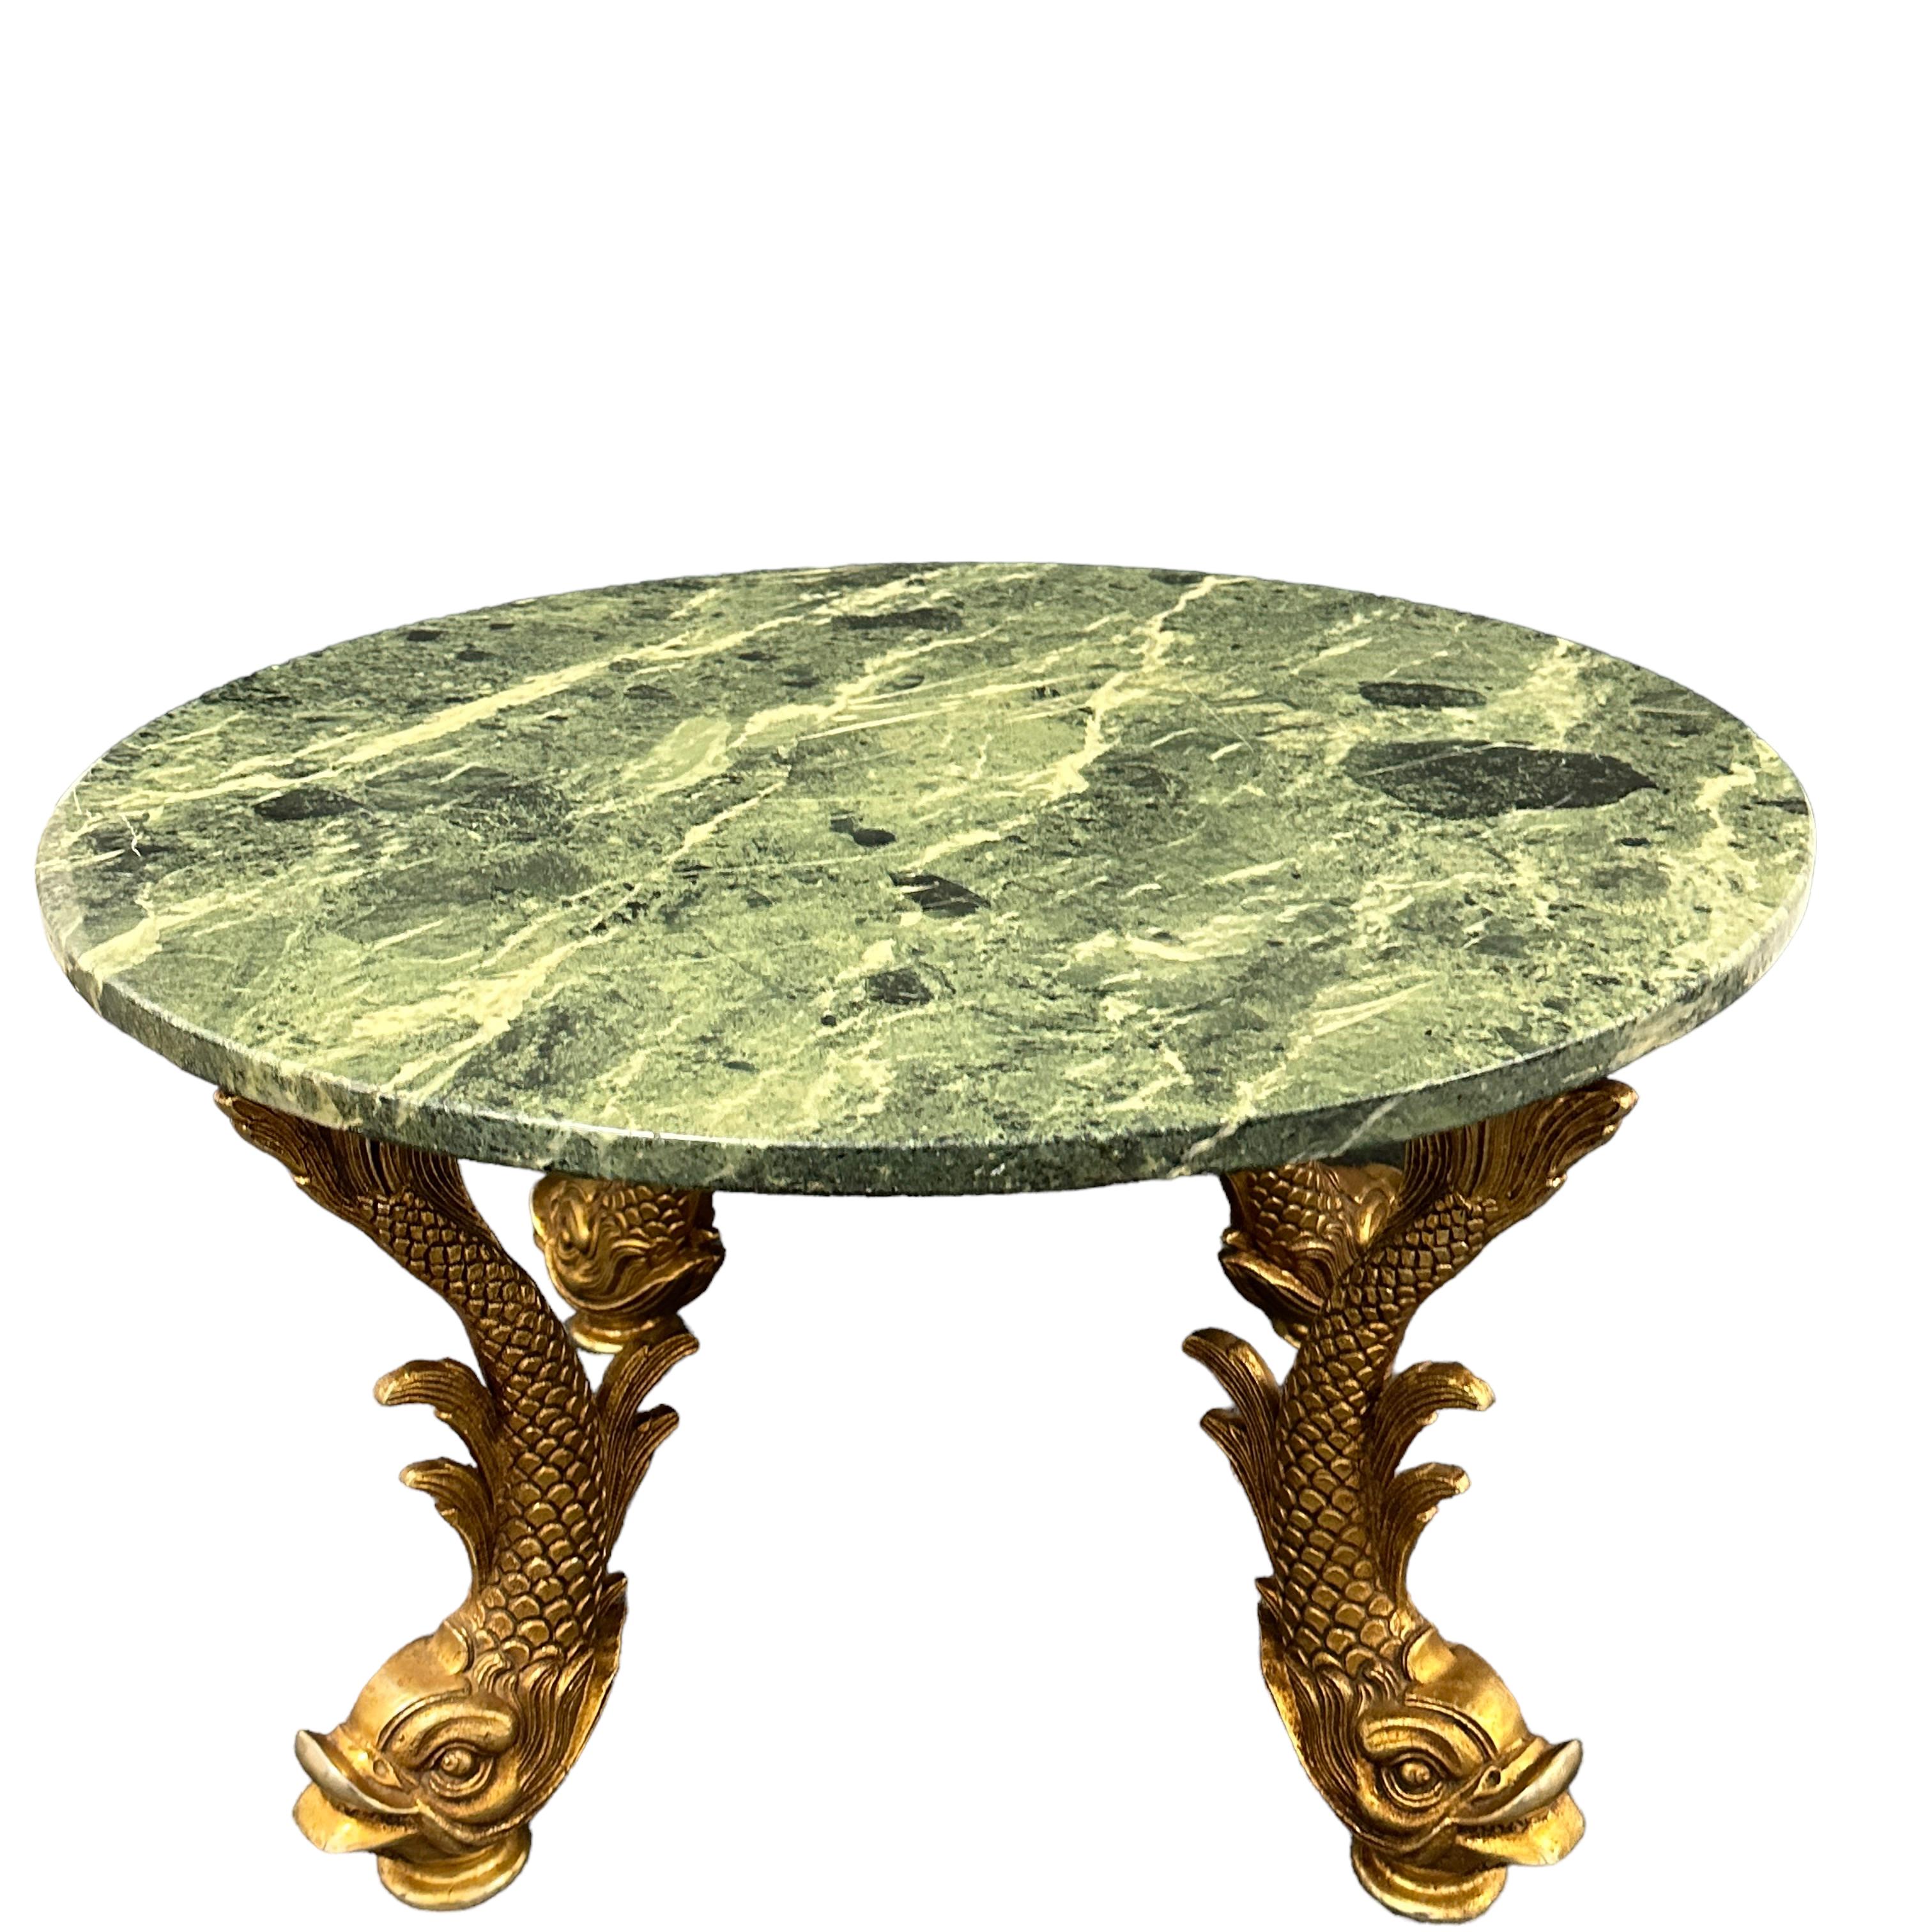 Offered is a 1980s Cocktail Coffee Table gilt bronze Koi or Dolphin Base Organic Design green marble Top nice for a Palm Beach house.
This stylish and chic Hollywood Regency inspired cocktail table dates to the 1980s and will make a definite